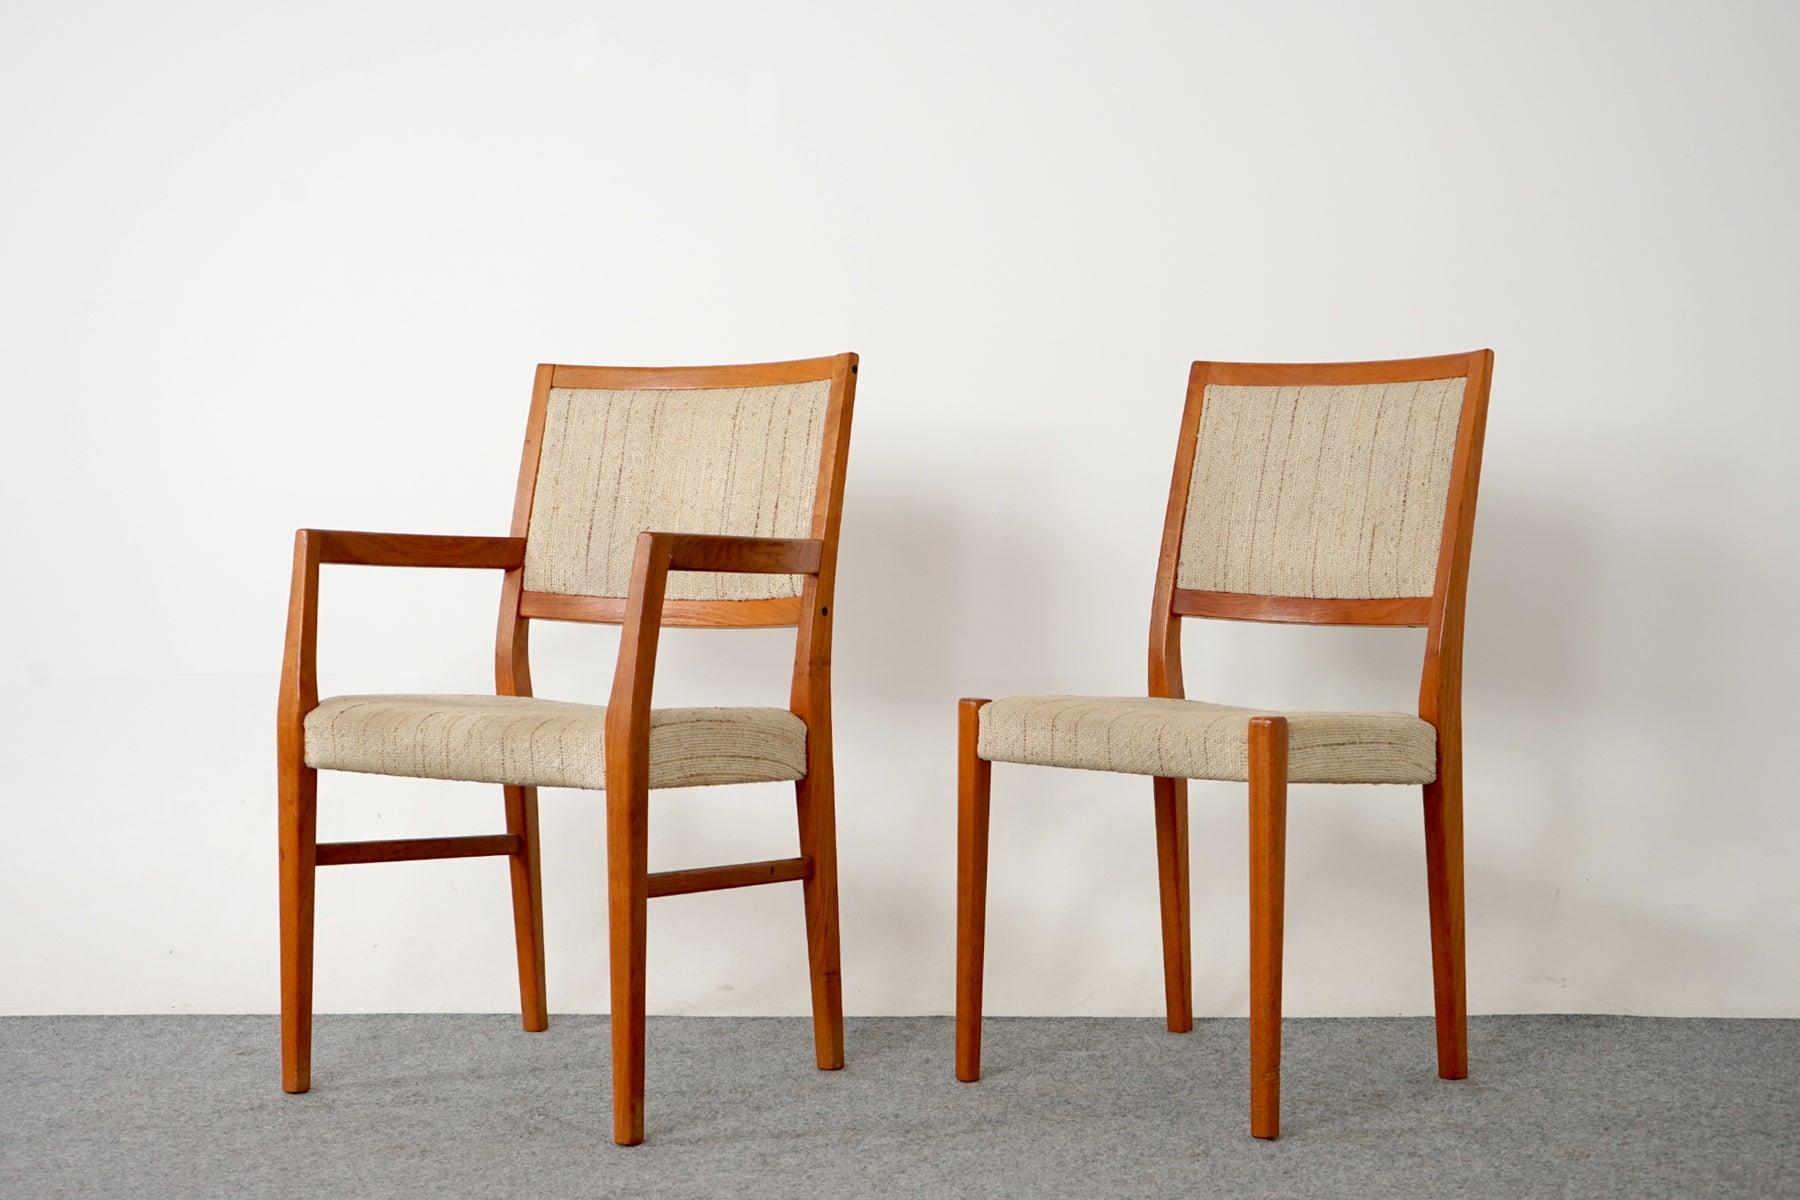 Teak dining chairs, by Svegards Markaryd, circa 1970's. Beautifully curved backrests and generous seat design provide support and comfort. Solid wood legs feature cross braces for added stability and support. Set includes one captain's chair, 5 side